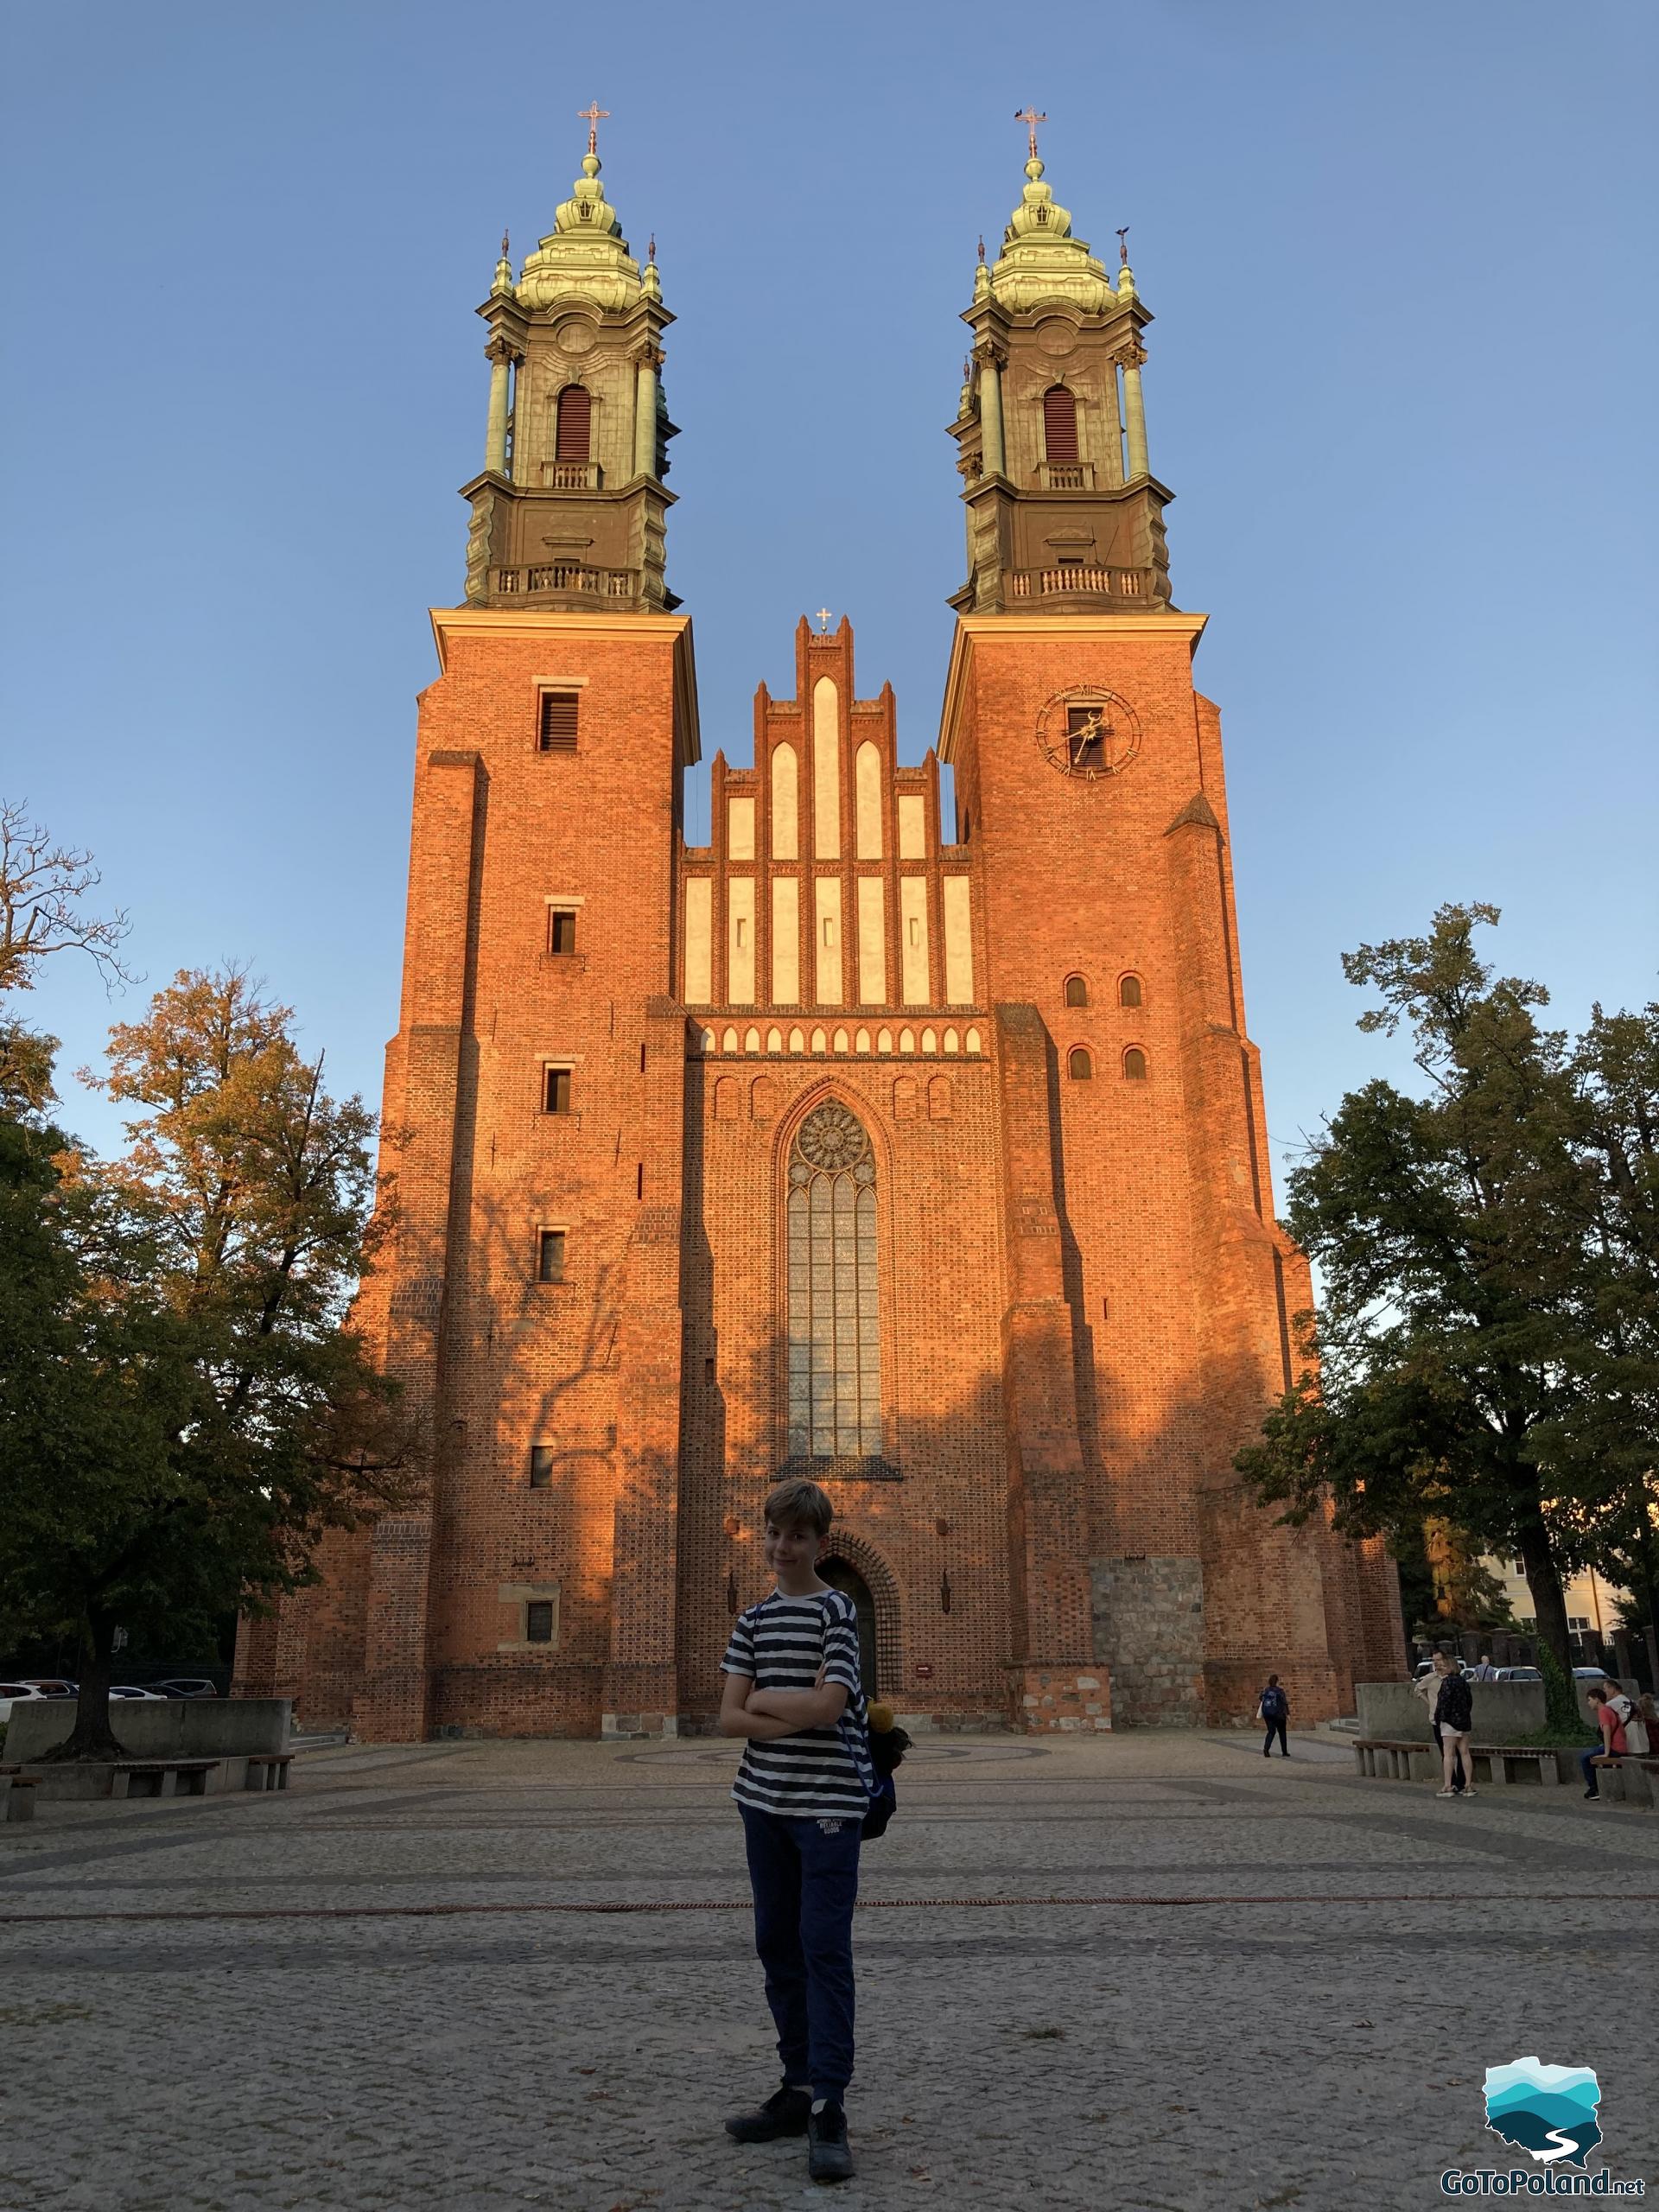 a boy standing in front of a tall red brick church with two huge towers